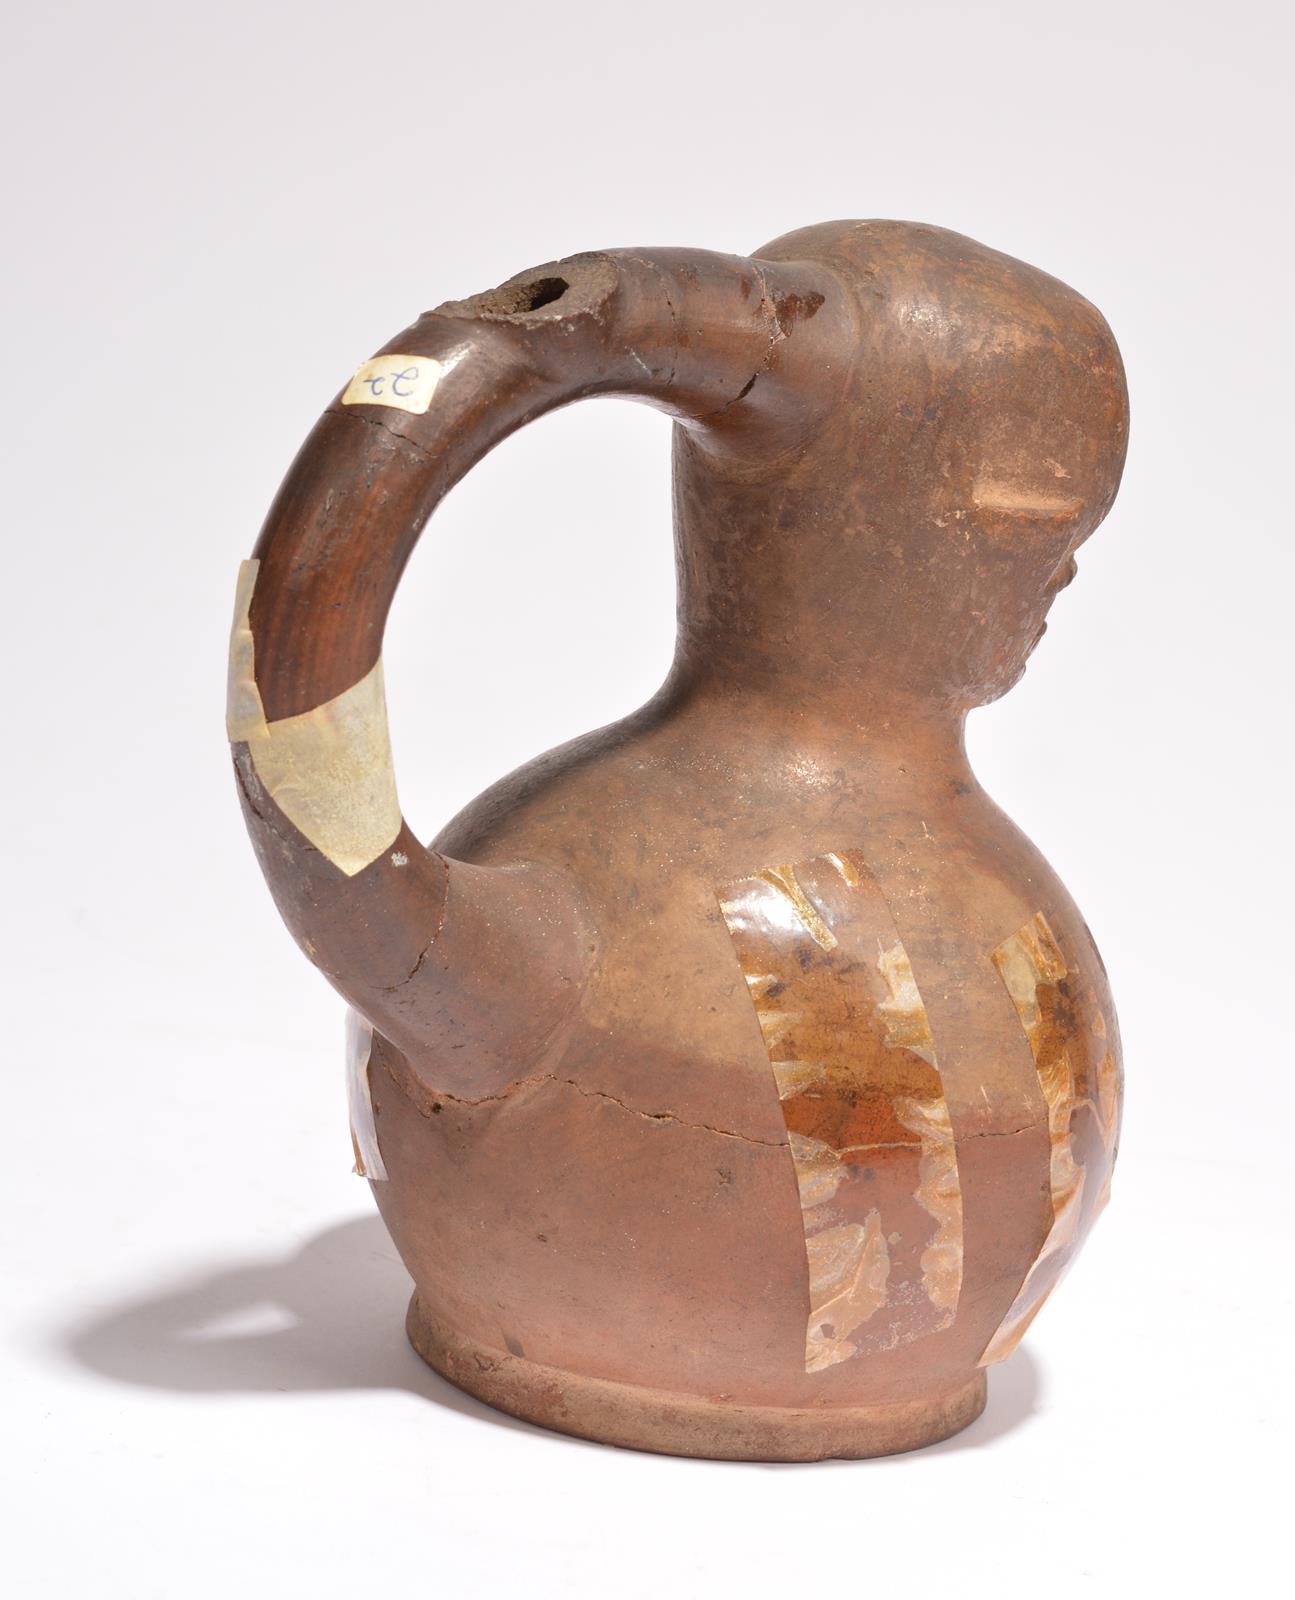 A Moche stirrup vessel Peru, circa 100 - 600 AD pottery with a skull top and with painted cloak - Image 2 of 2